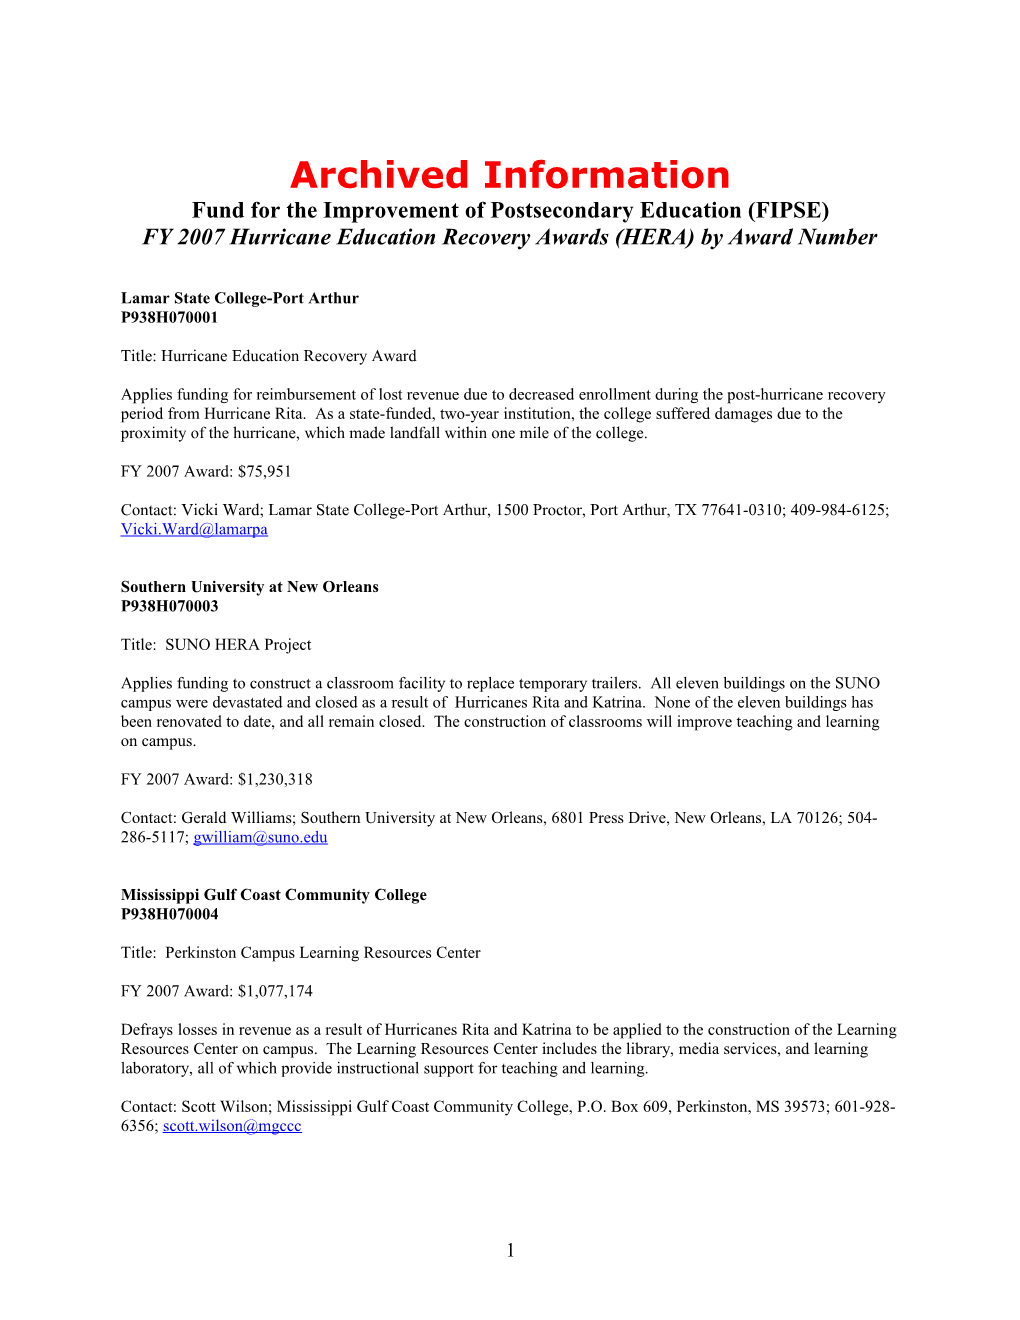 Archived: FY 2007 Project Abstracts for Hurricane Education Recovery Awards (MS Word)